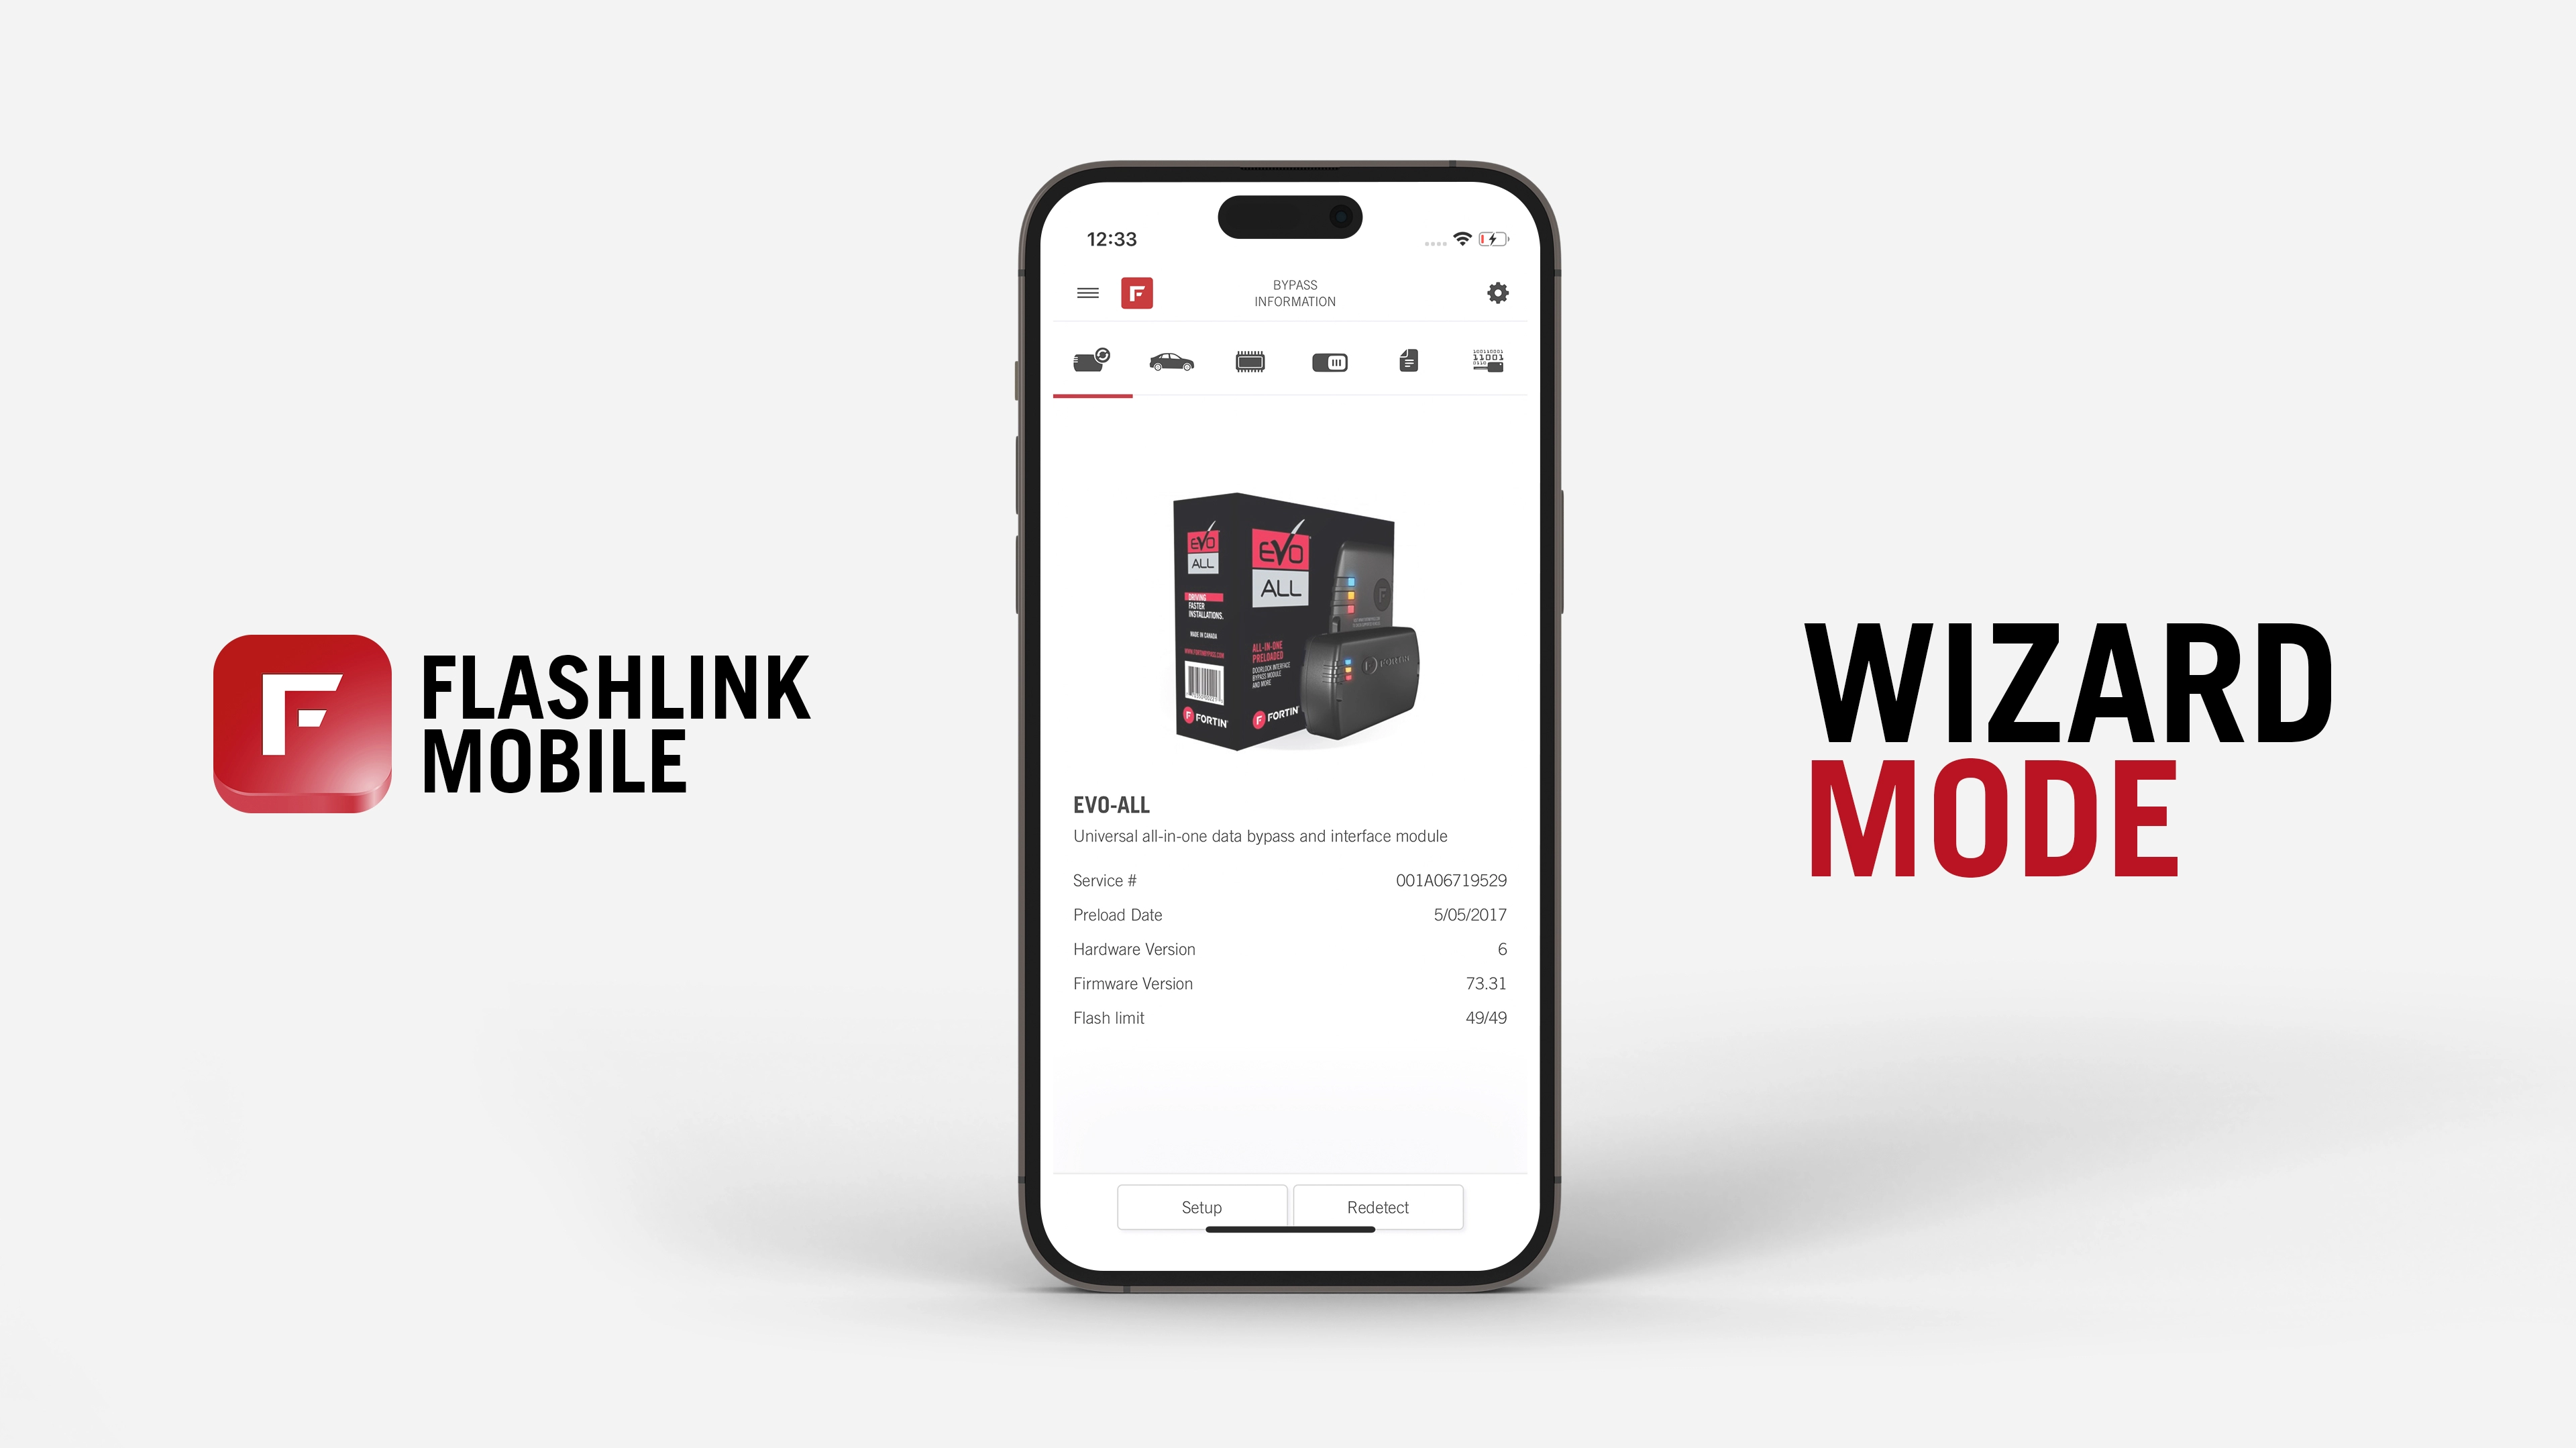 Find out how to program a Fortin module with the FlashLink Mobile mobile application and Bluetooth device in Wizard Mode. By watching this video you will see how to use the preconfigured installation modes to update and configure a Fortin EVO module for your vehicle.